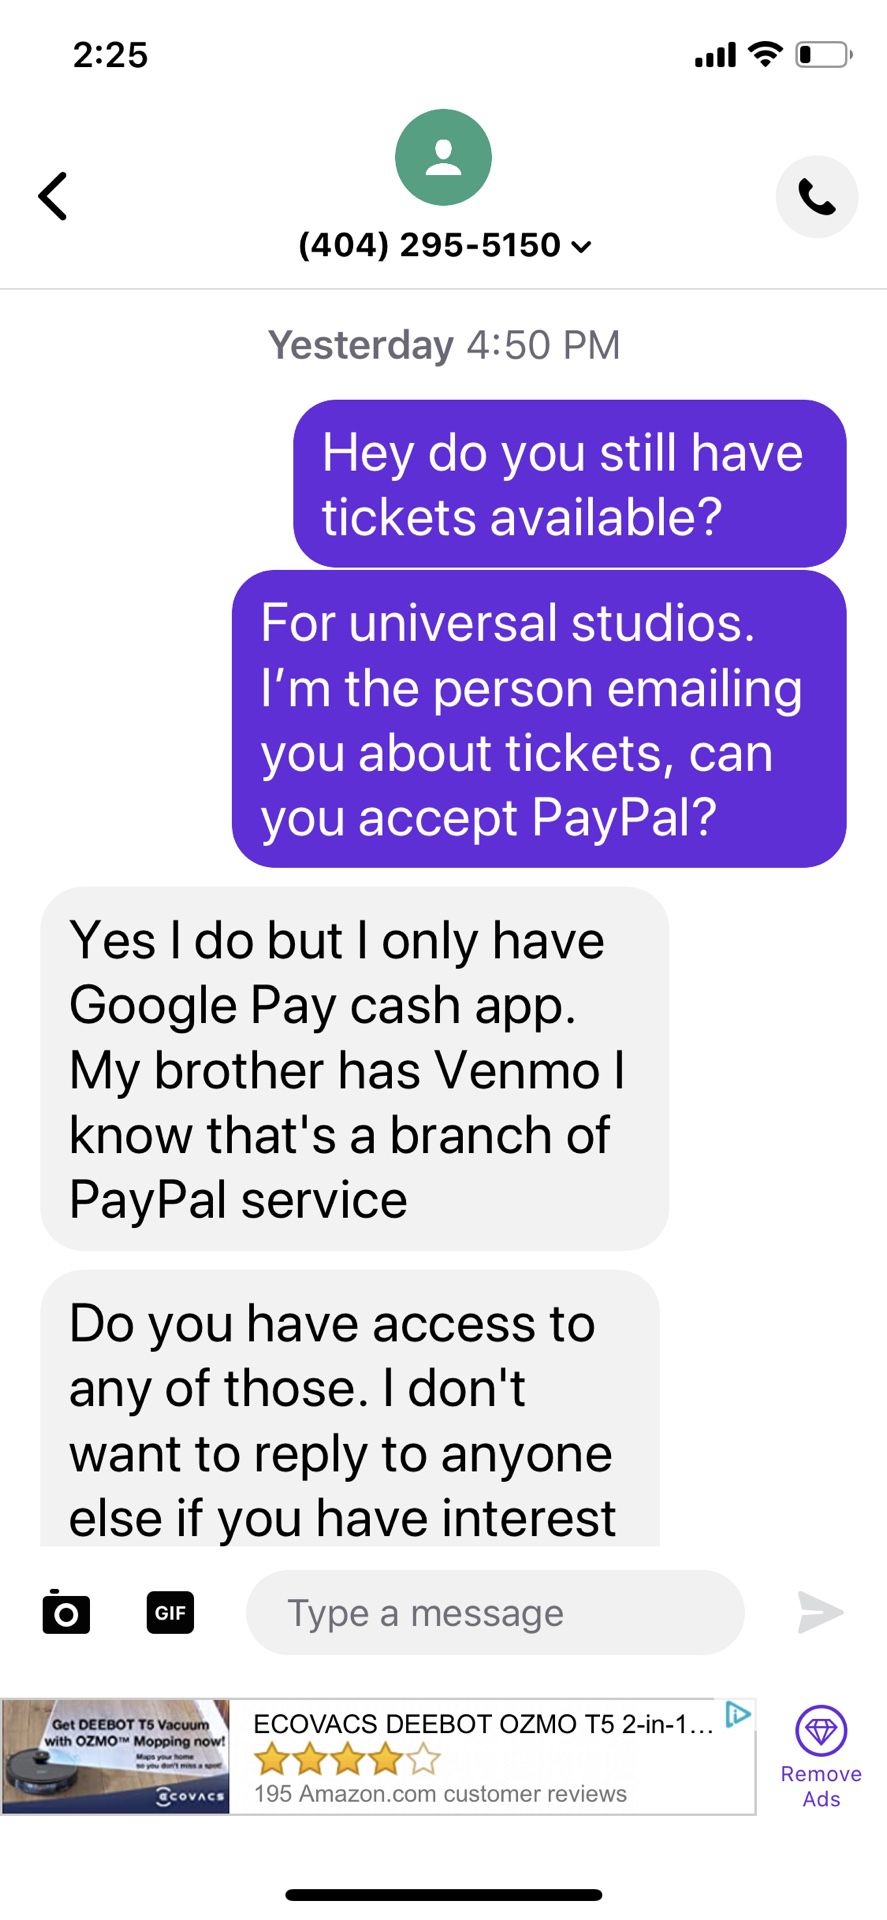 Universal tickets are a scam